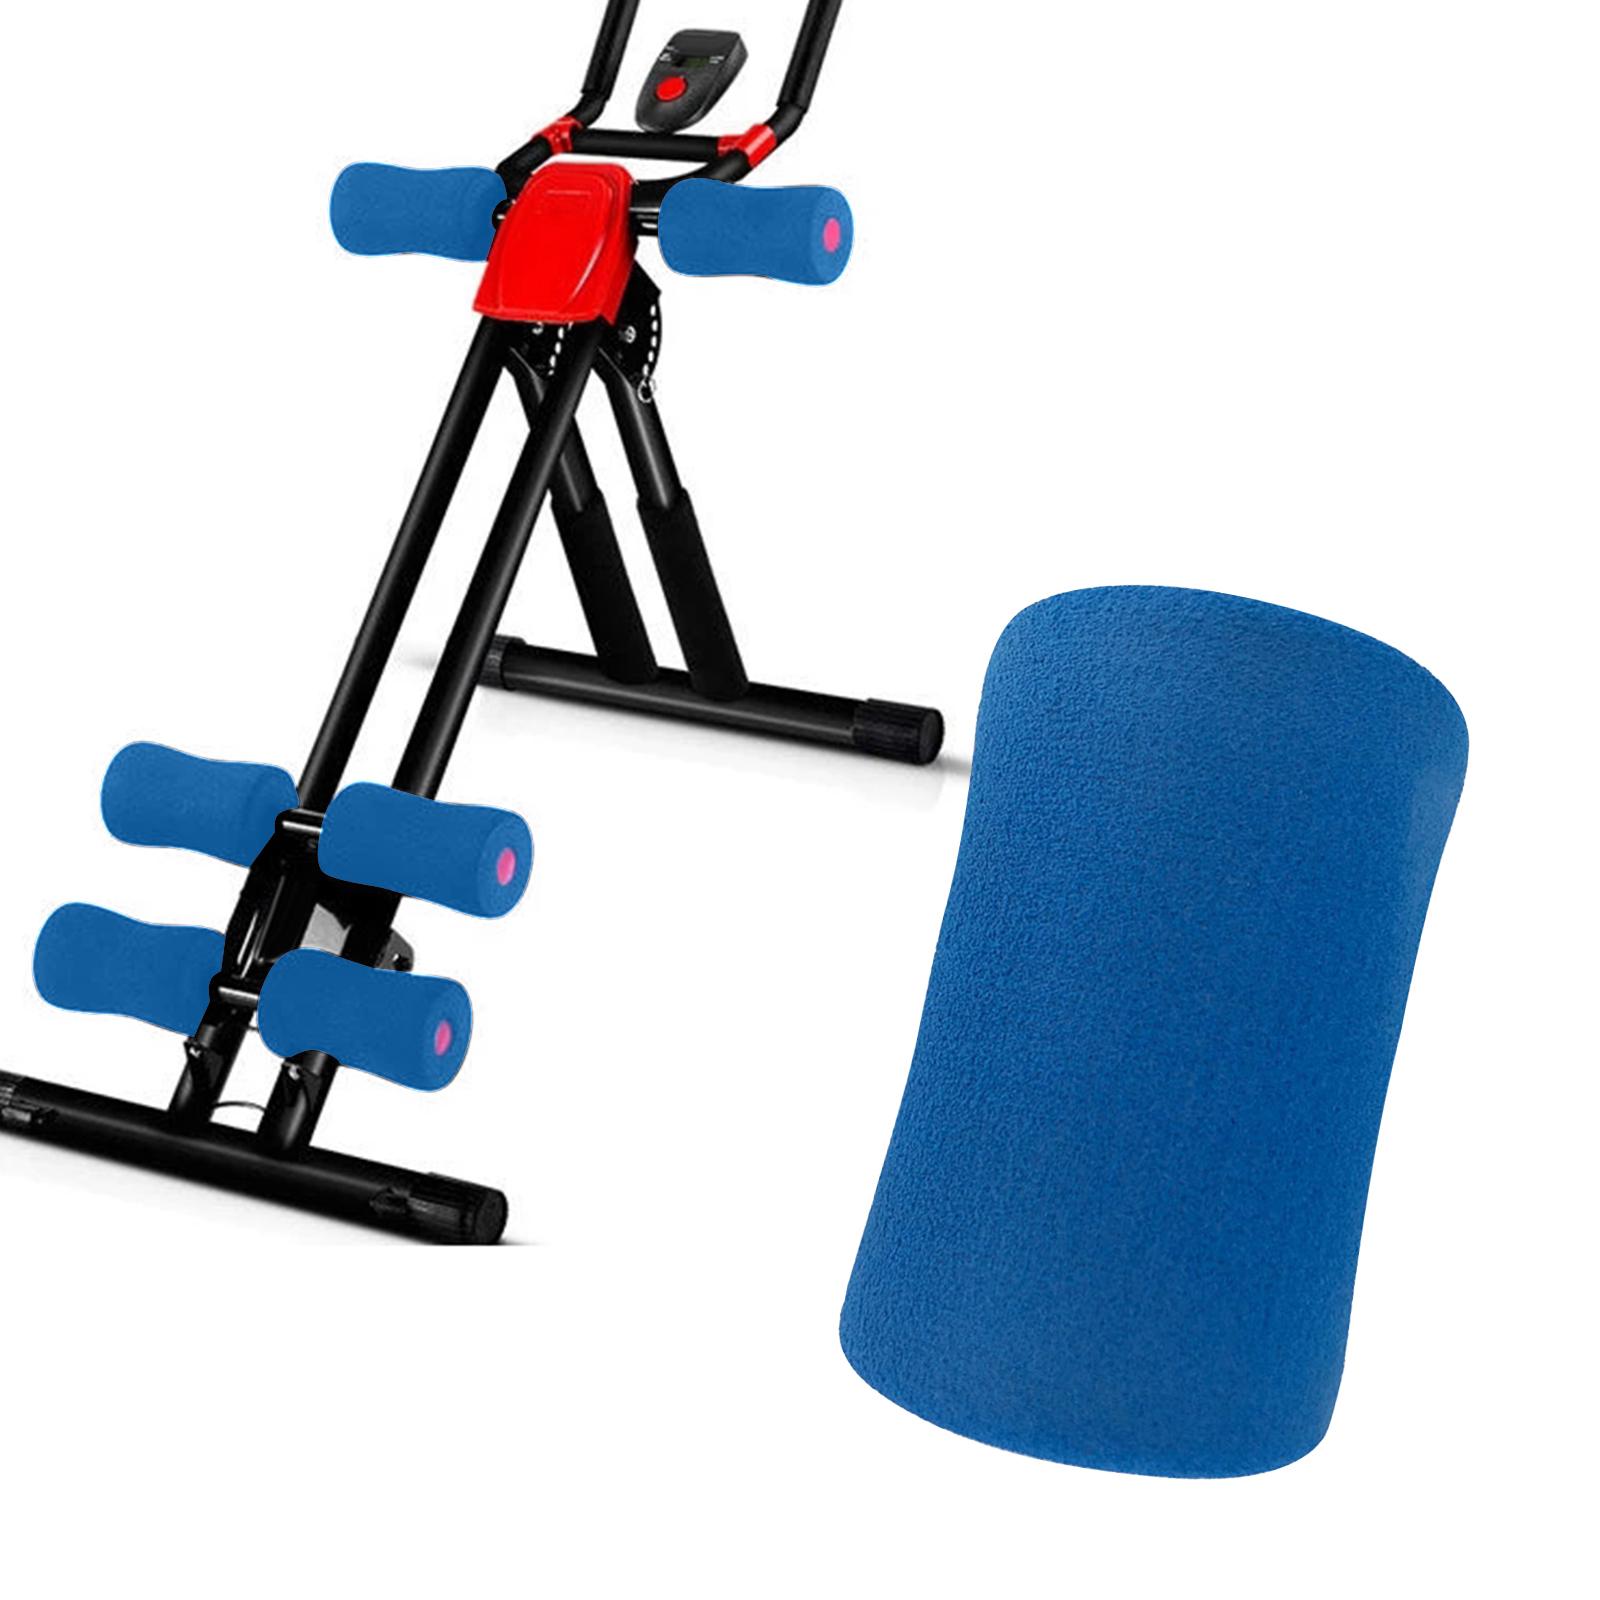 Foam Foot Pads Rollers for Weight Bench Abdominal Trainer Workout Machine Blue